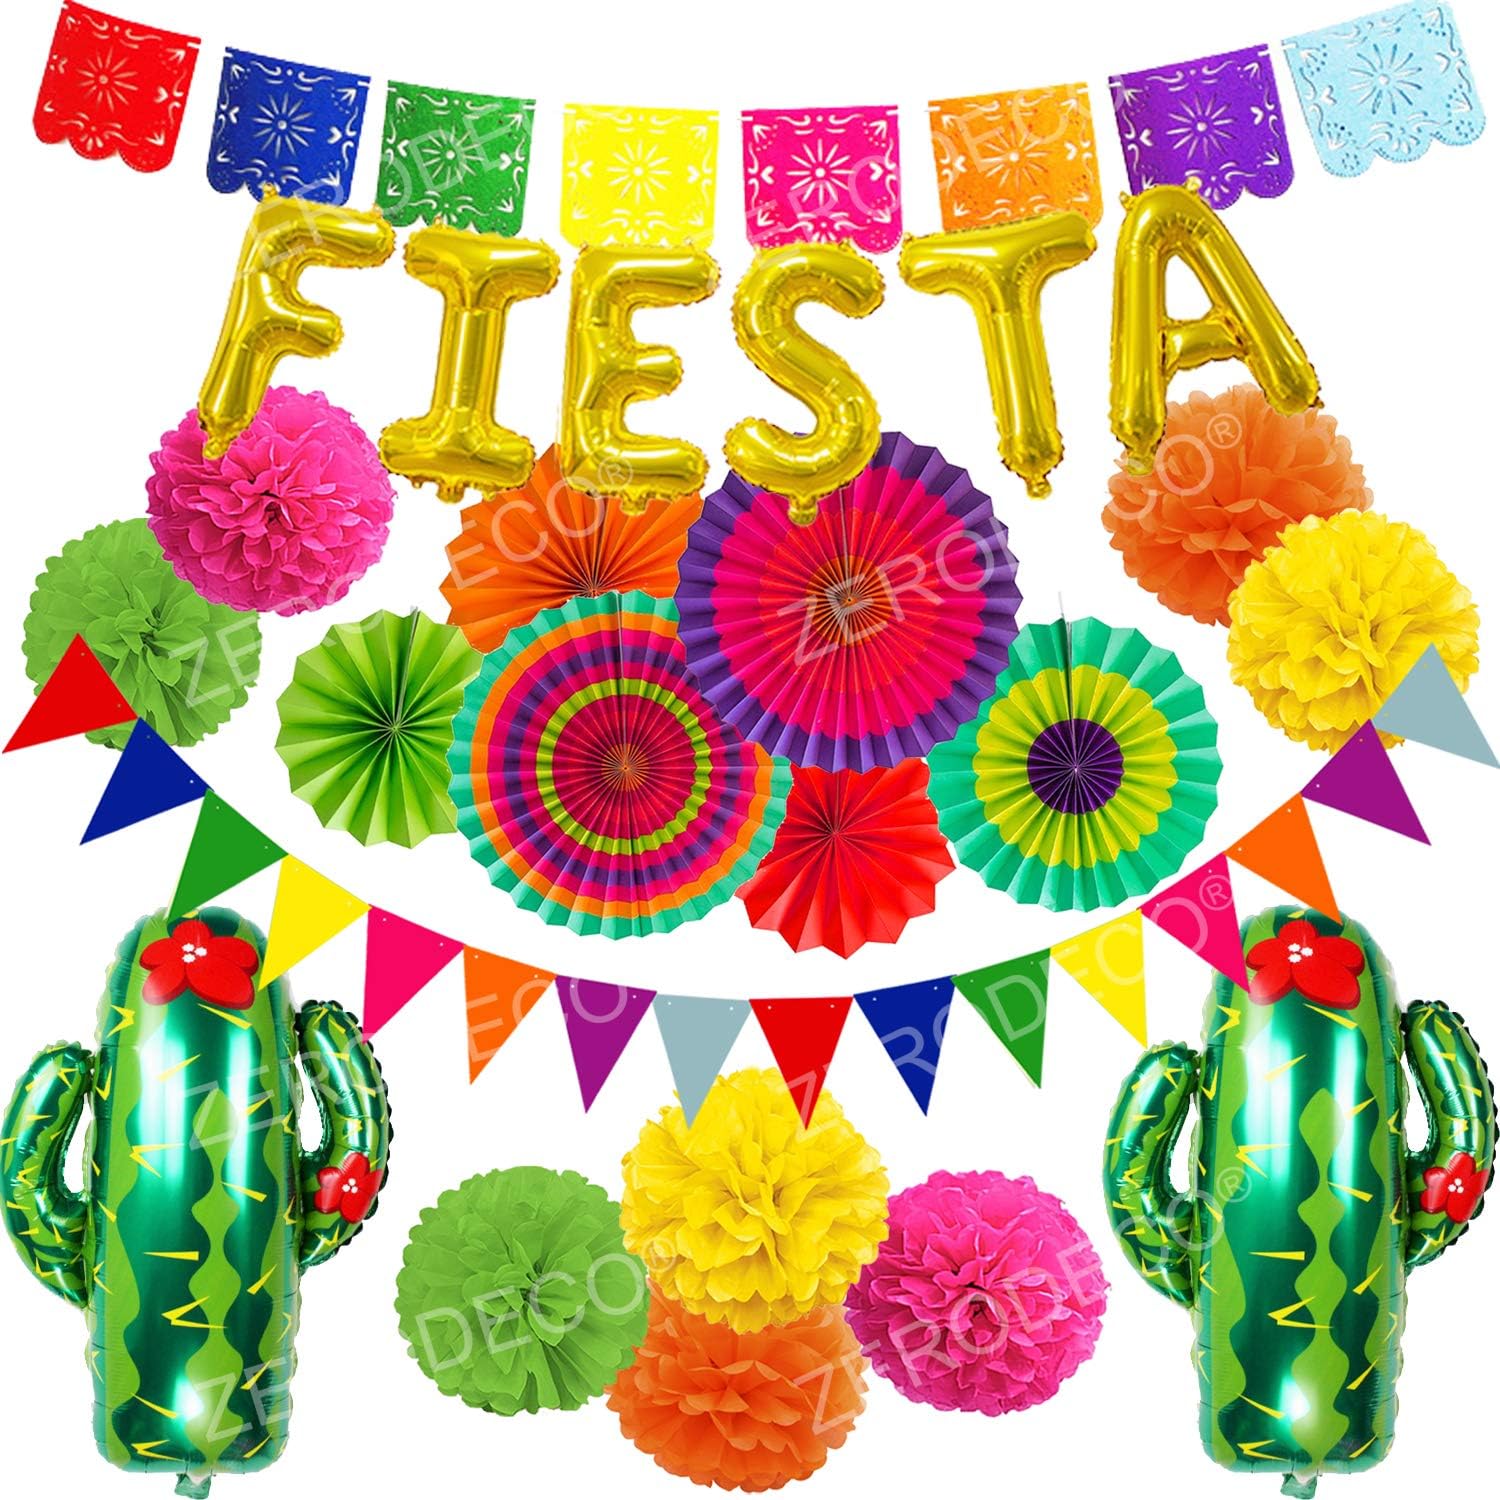 ZERODECO Fiesta Party Decoration, Multicolor Festival Mexicano Picado Banner Foil Fiesta and Cactus Balloons Paper Fan Pompoms Triangle Bunting Banner for Fiesta Mexican Cinco De Mayo Party